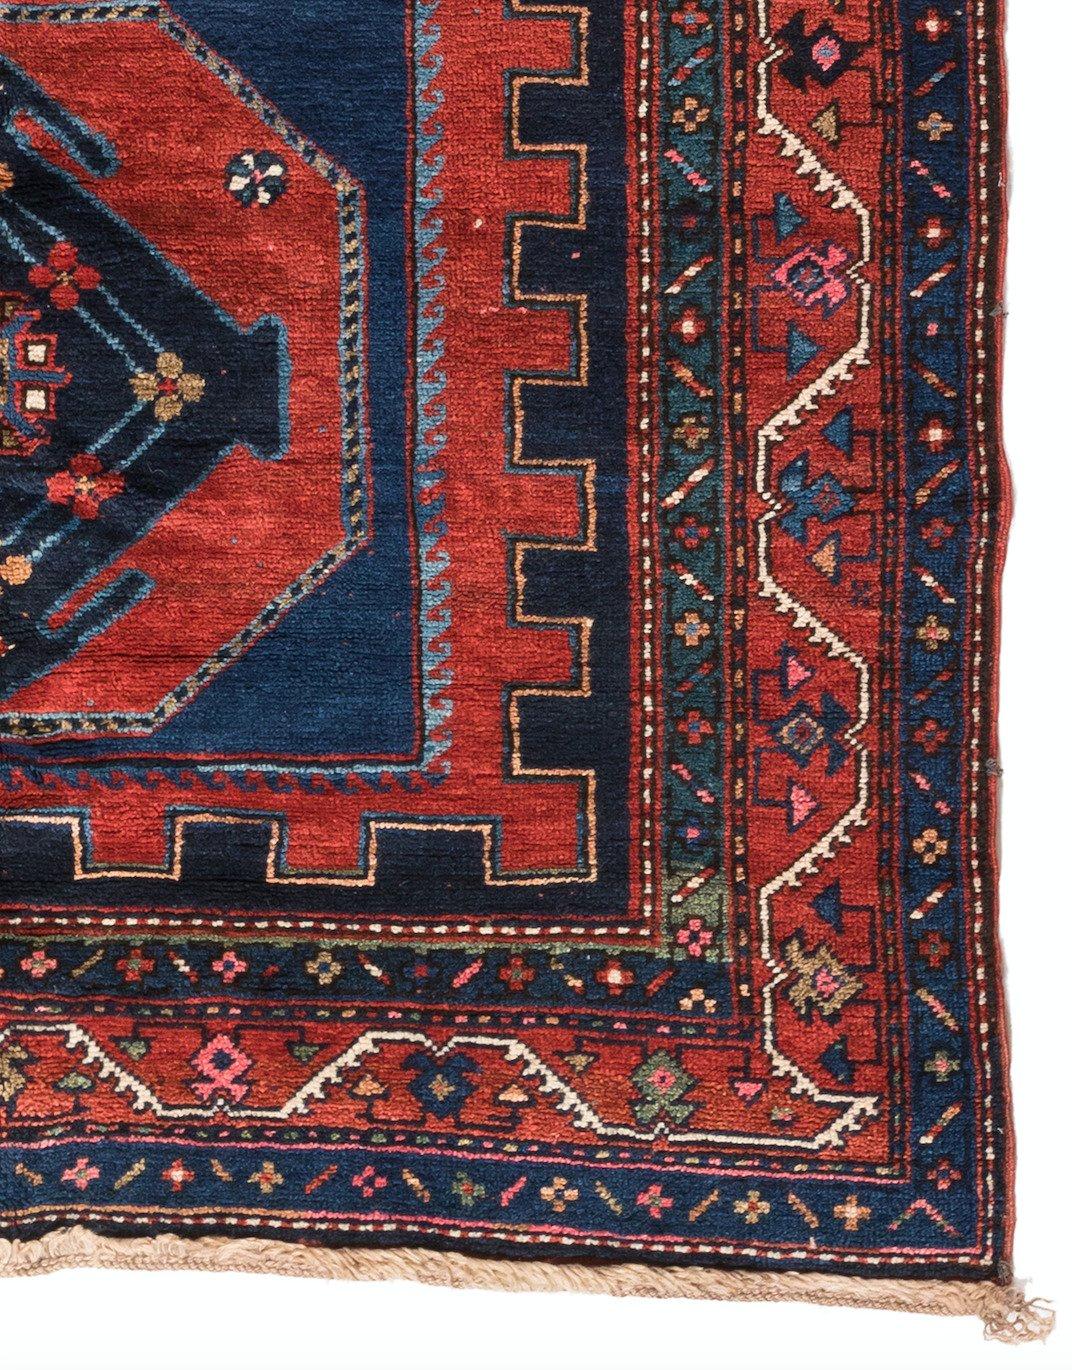 Antique Red and Blue Caucasian Tribal Kazak Rug, circa 1930s In Good Condition For Sale In New York, NY